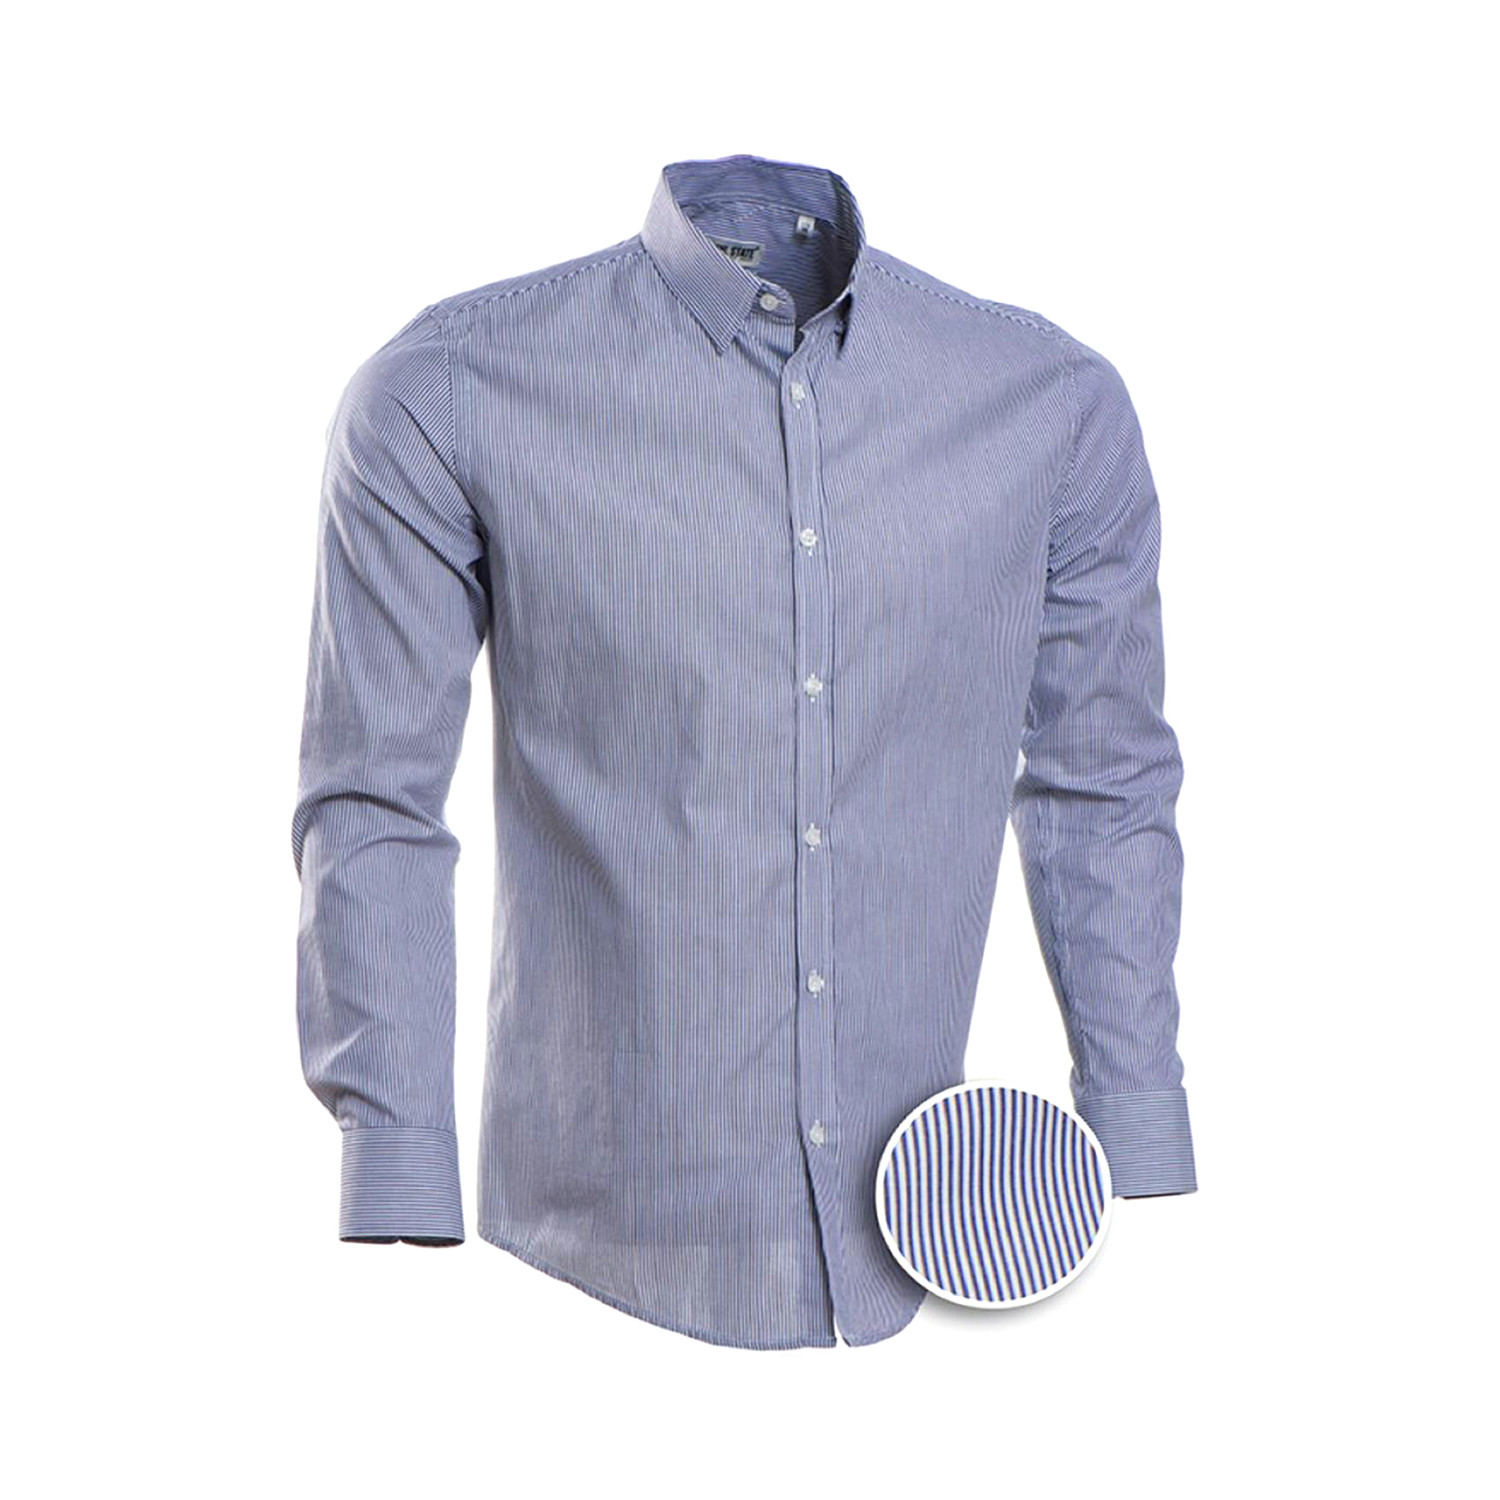 Hairline Stripe Slim Fit Dress Shirt // Navy (S) - O&J DAY FOREIGN ...